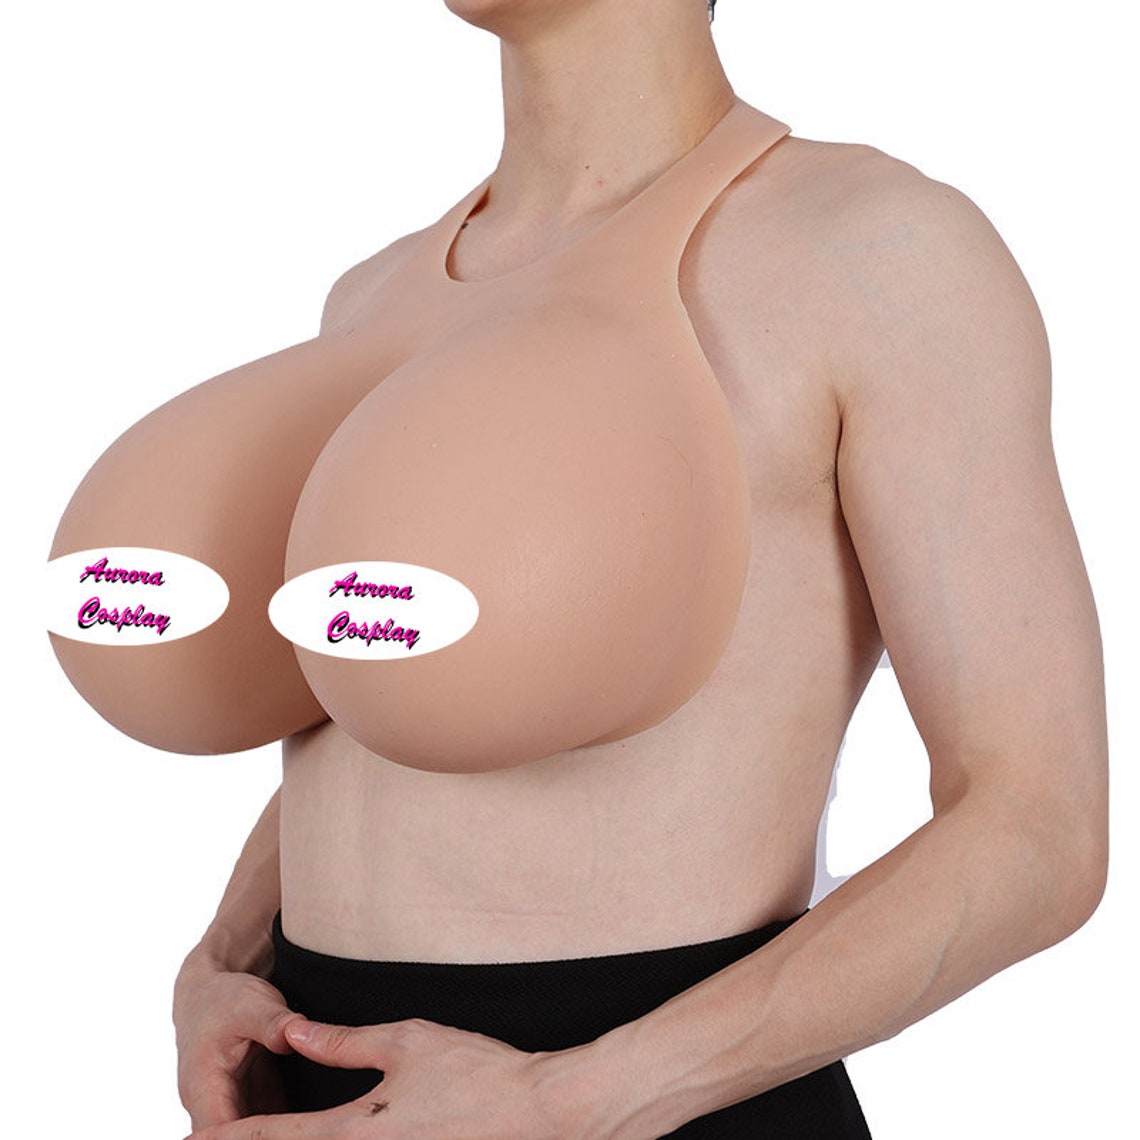 Silicone H-Cup Backless Breast Forms - Perfect for Cross-Dressing